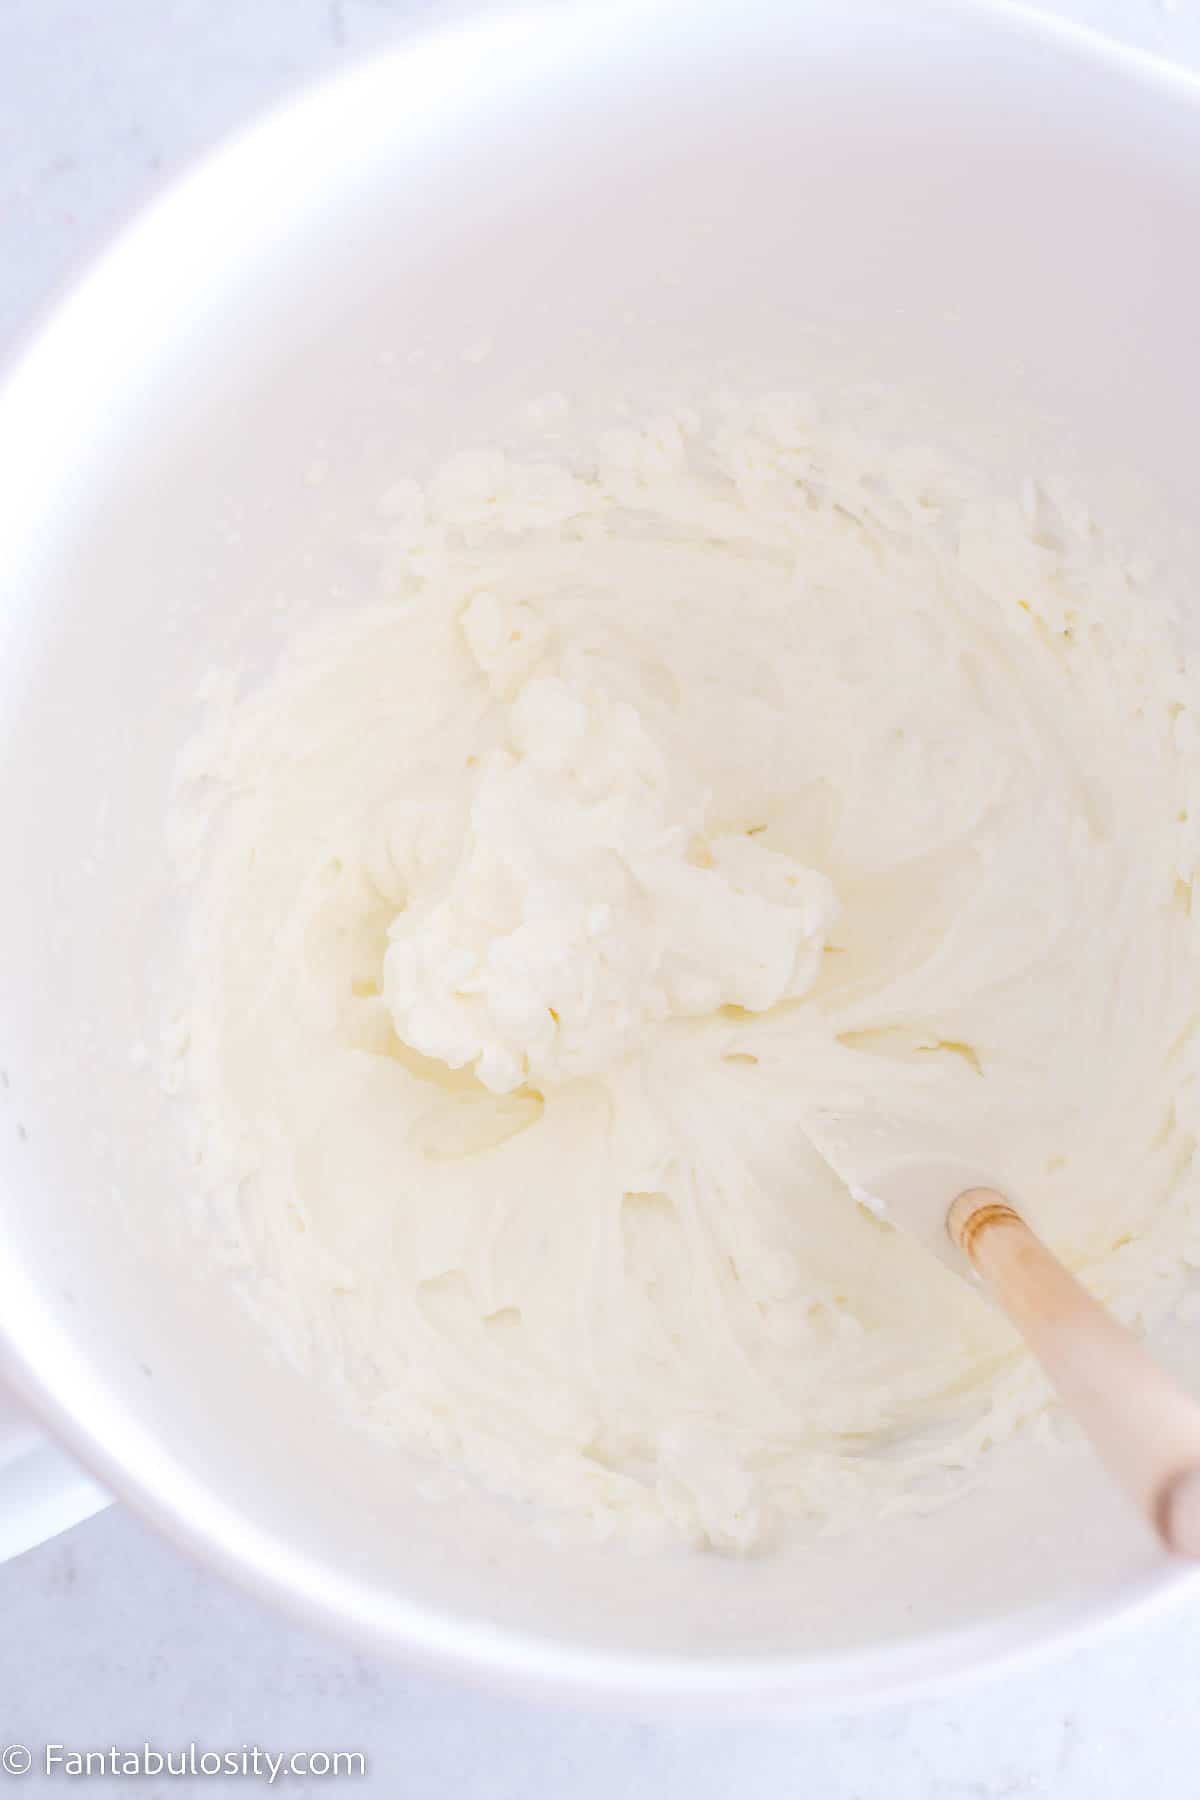 Homemade whipped cream in white mixing bowl